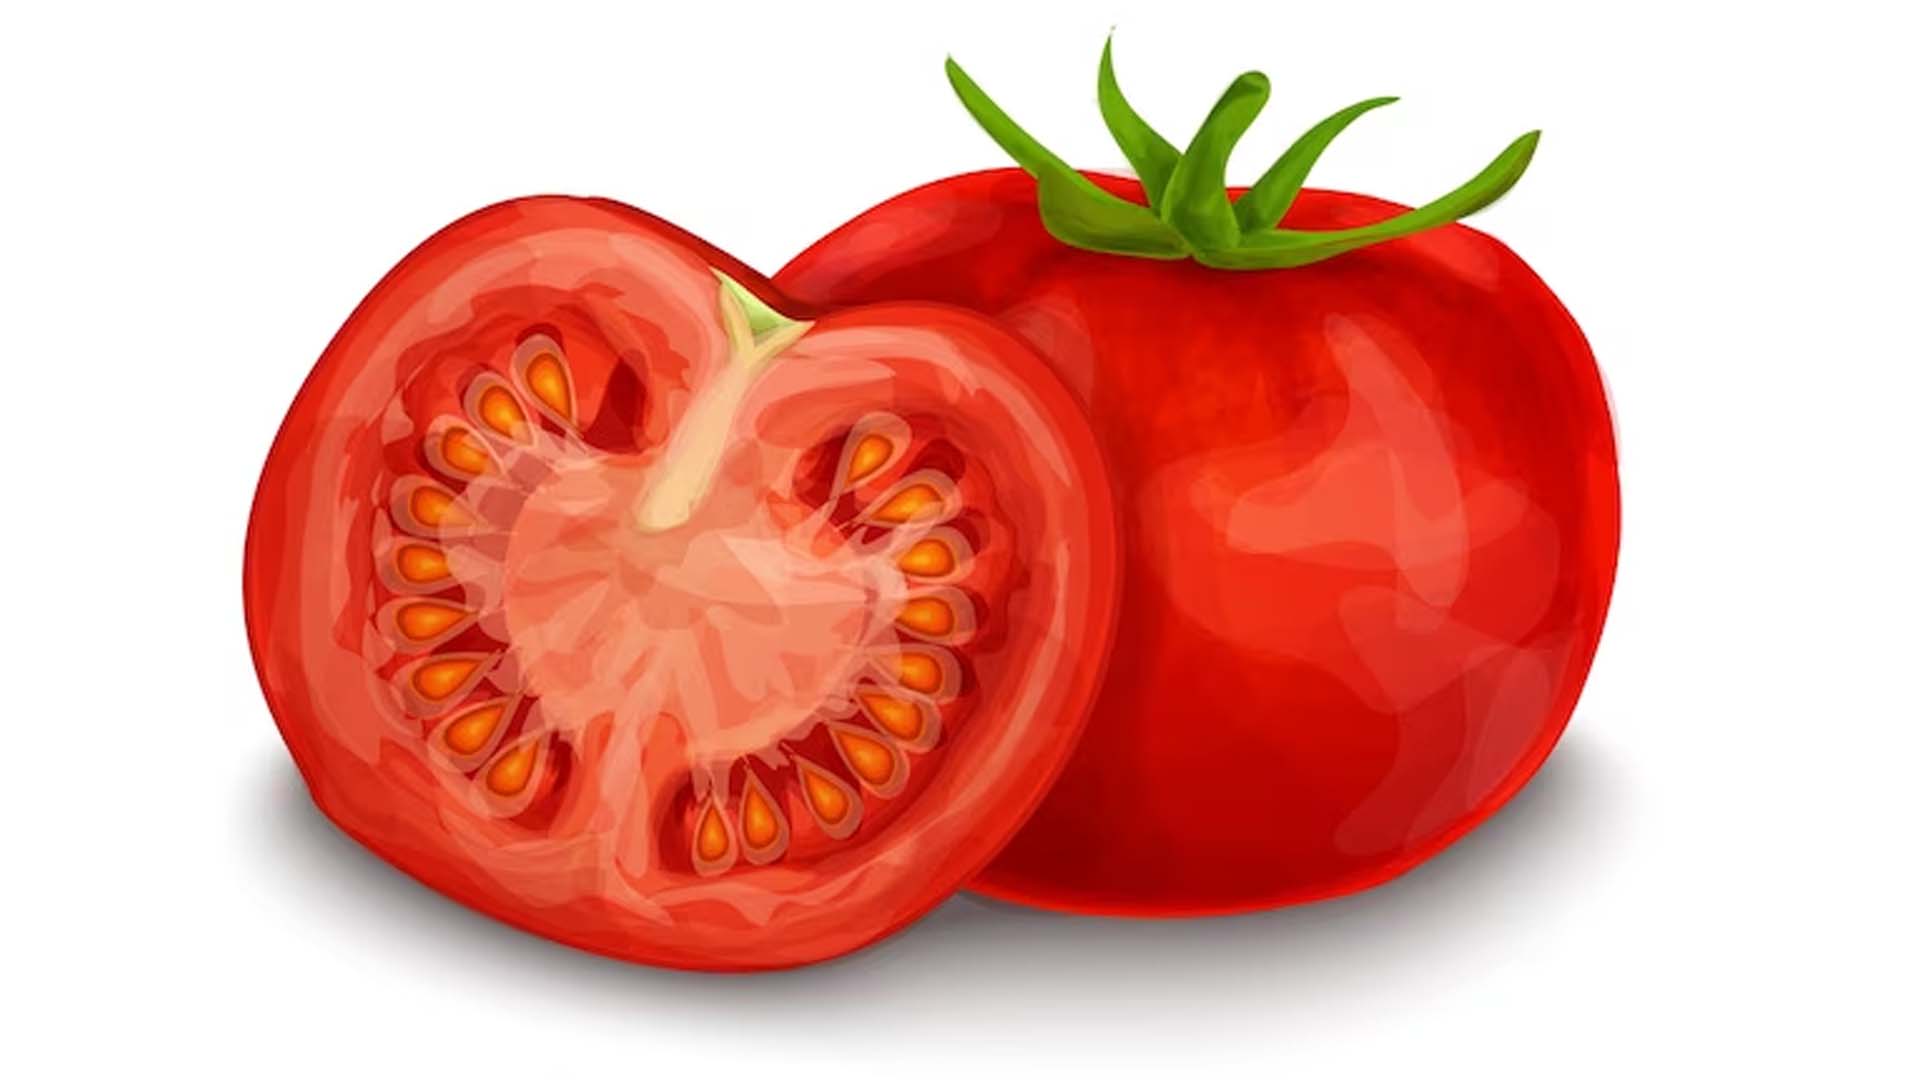 Tomato and Seeds